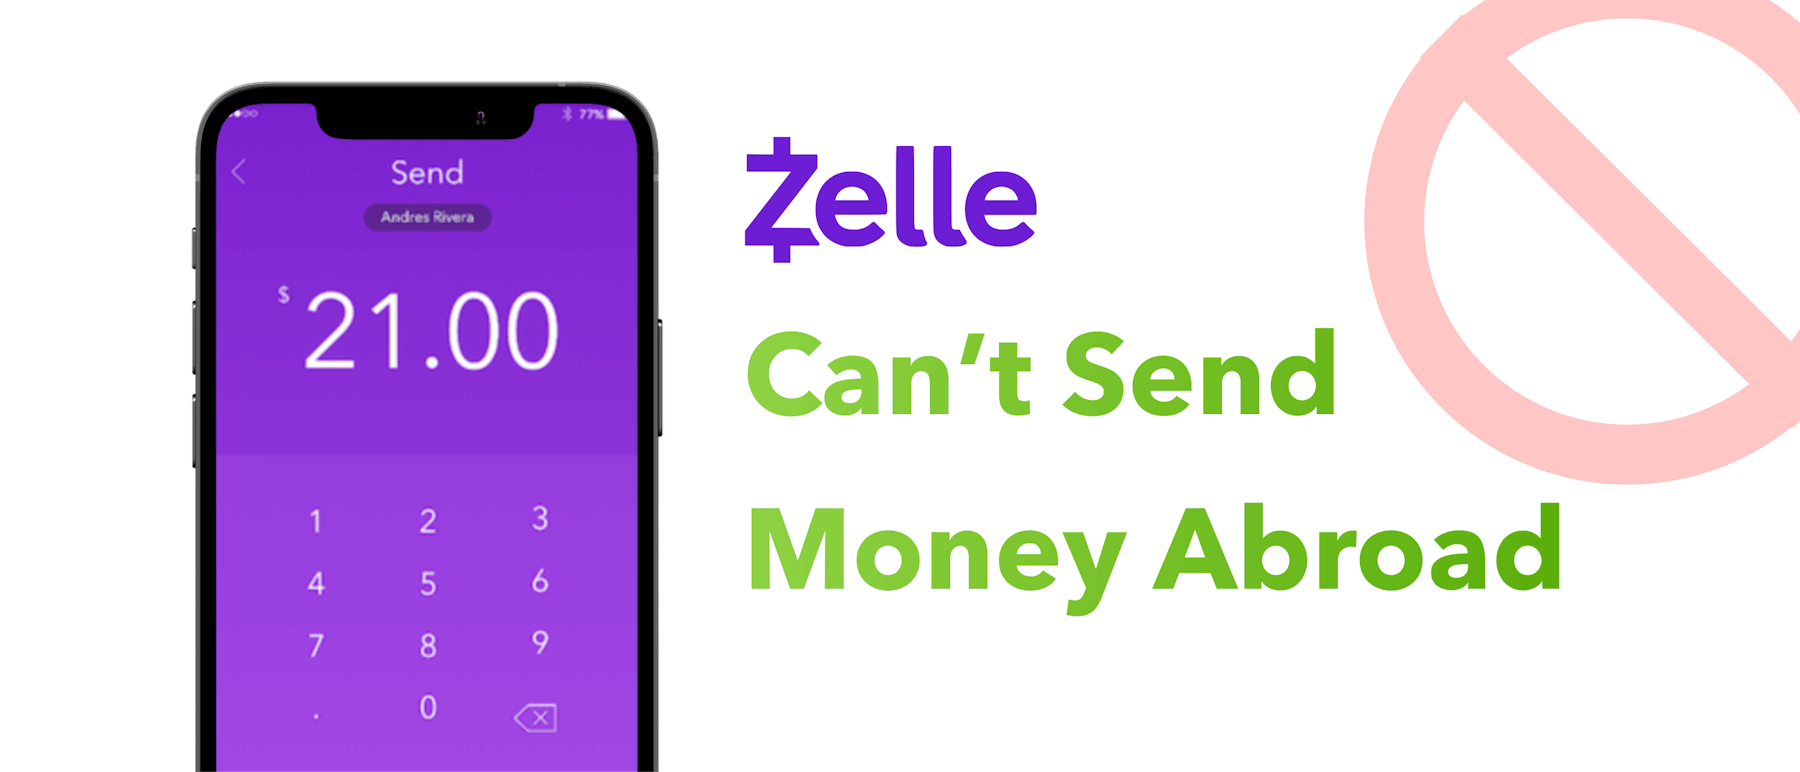 Zelle can't send money abroad
